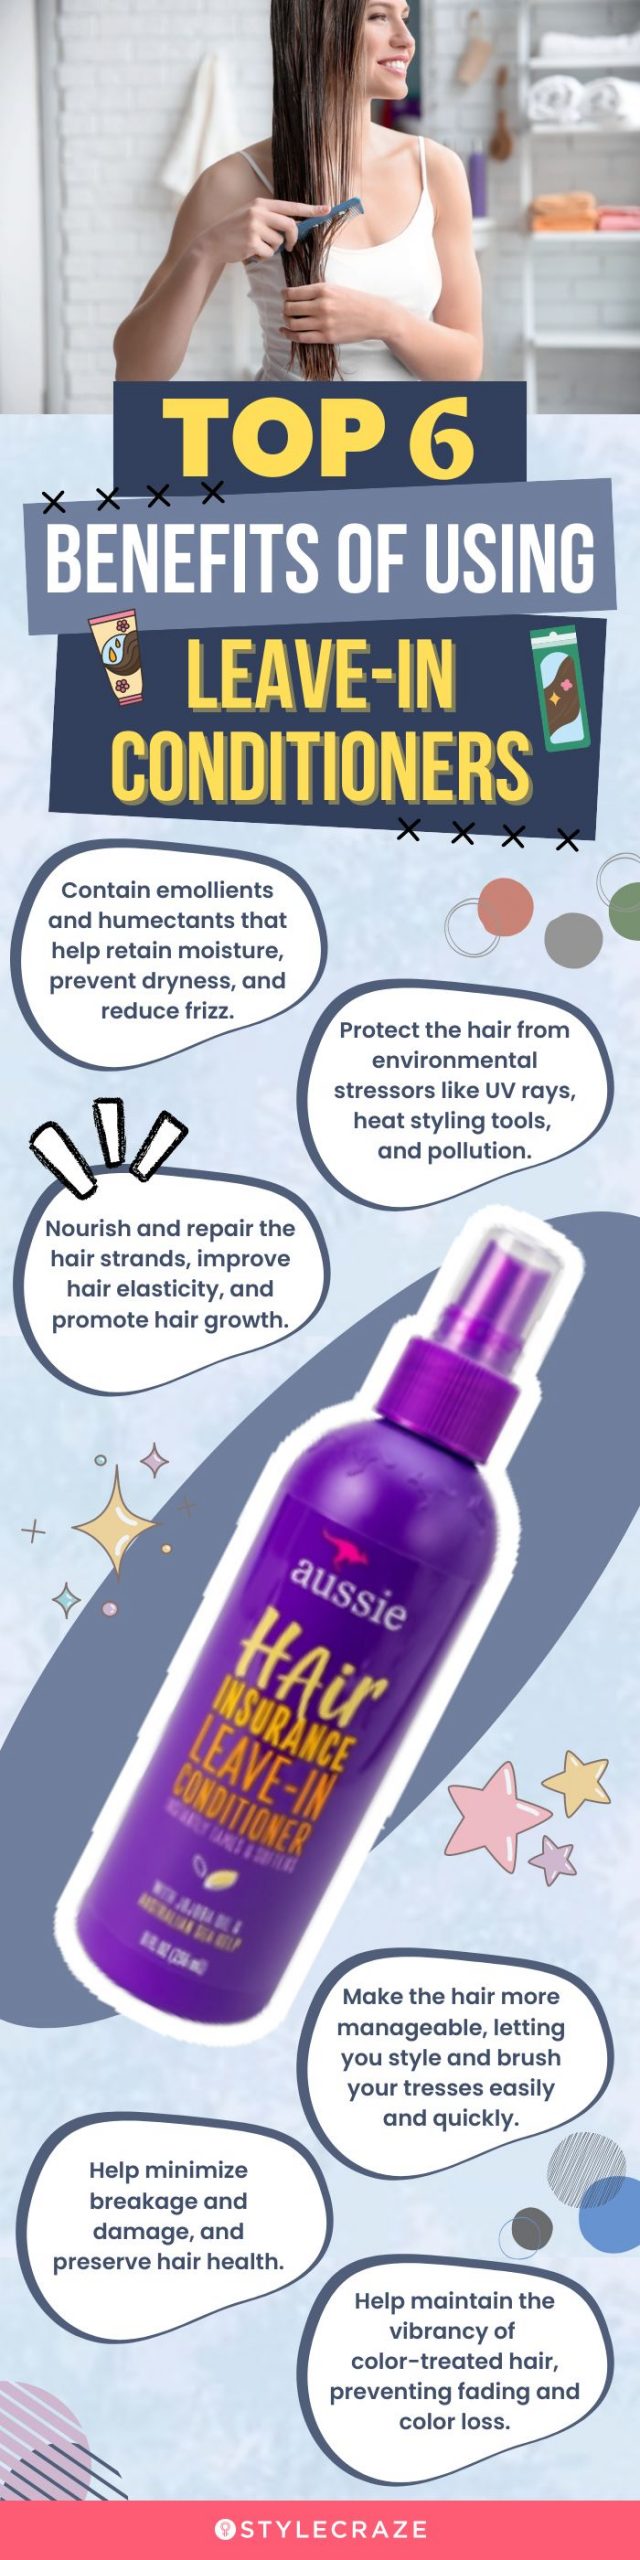 Top 6 Benefits Of Using Leave-In Conditioners (infographic)